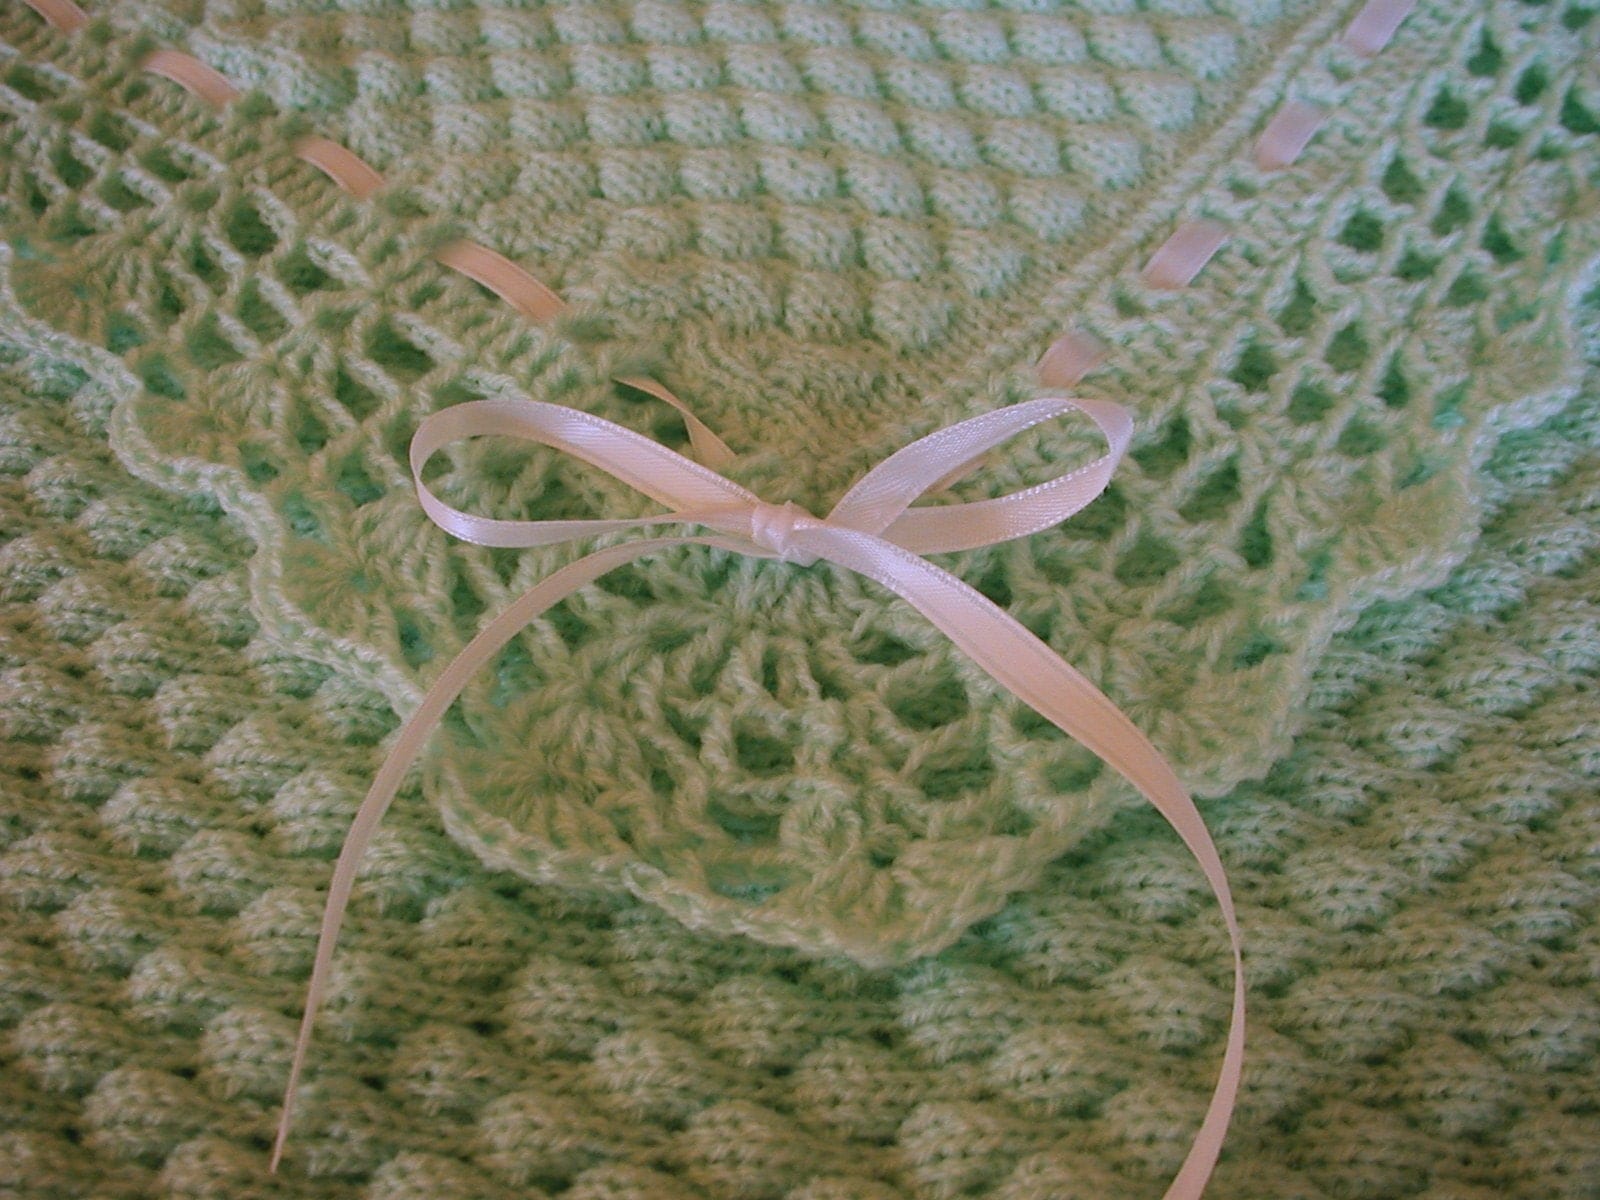 Cotton Chenille Crochet Baby Blanket Free Pattern at Jimmy Beans Wool